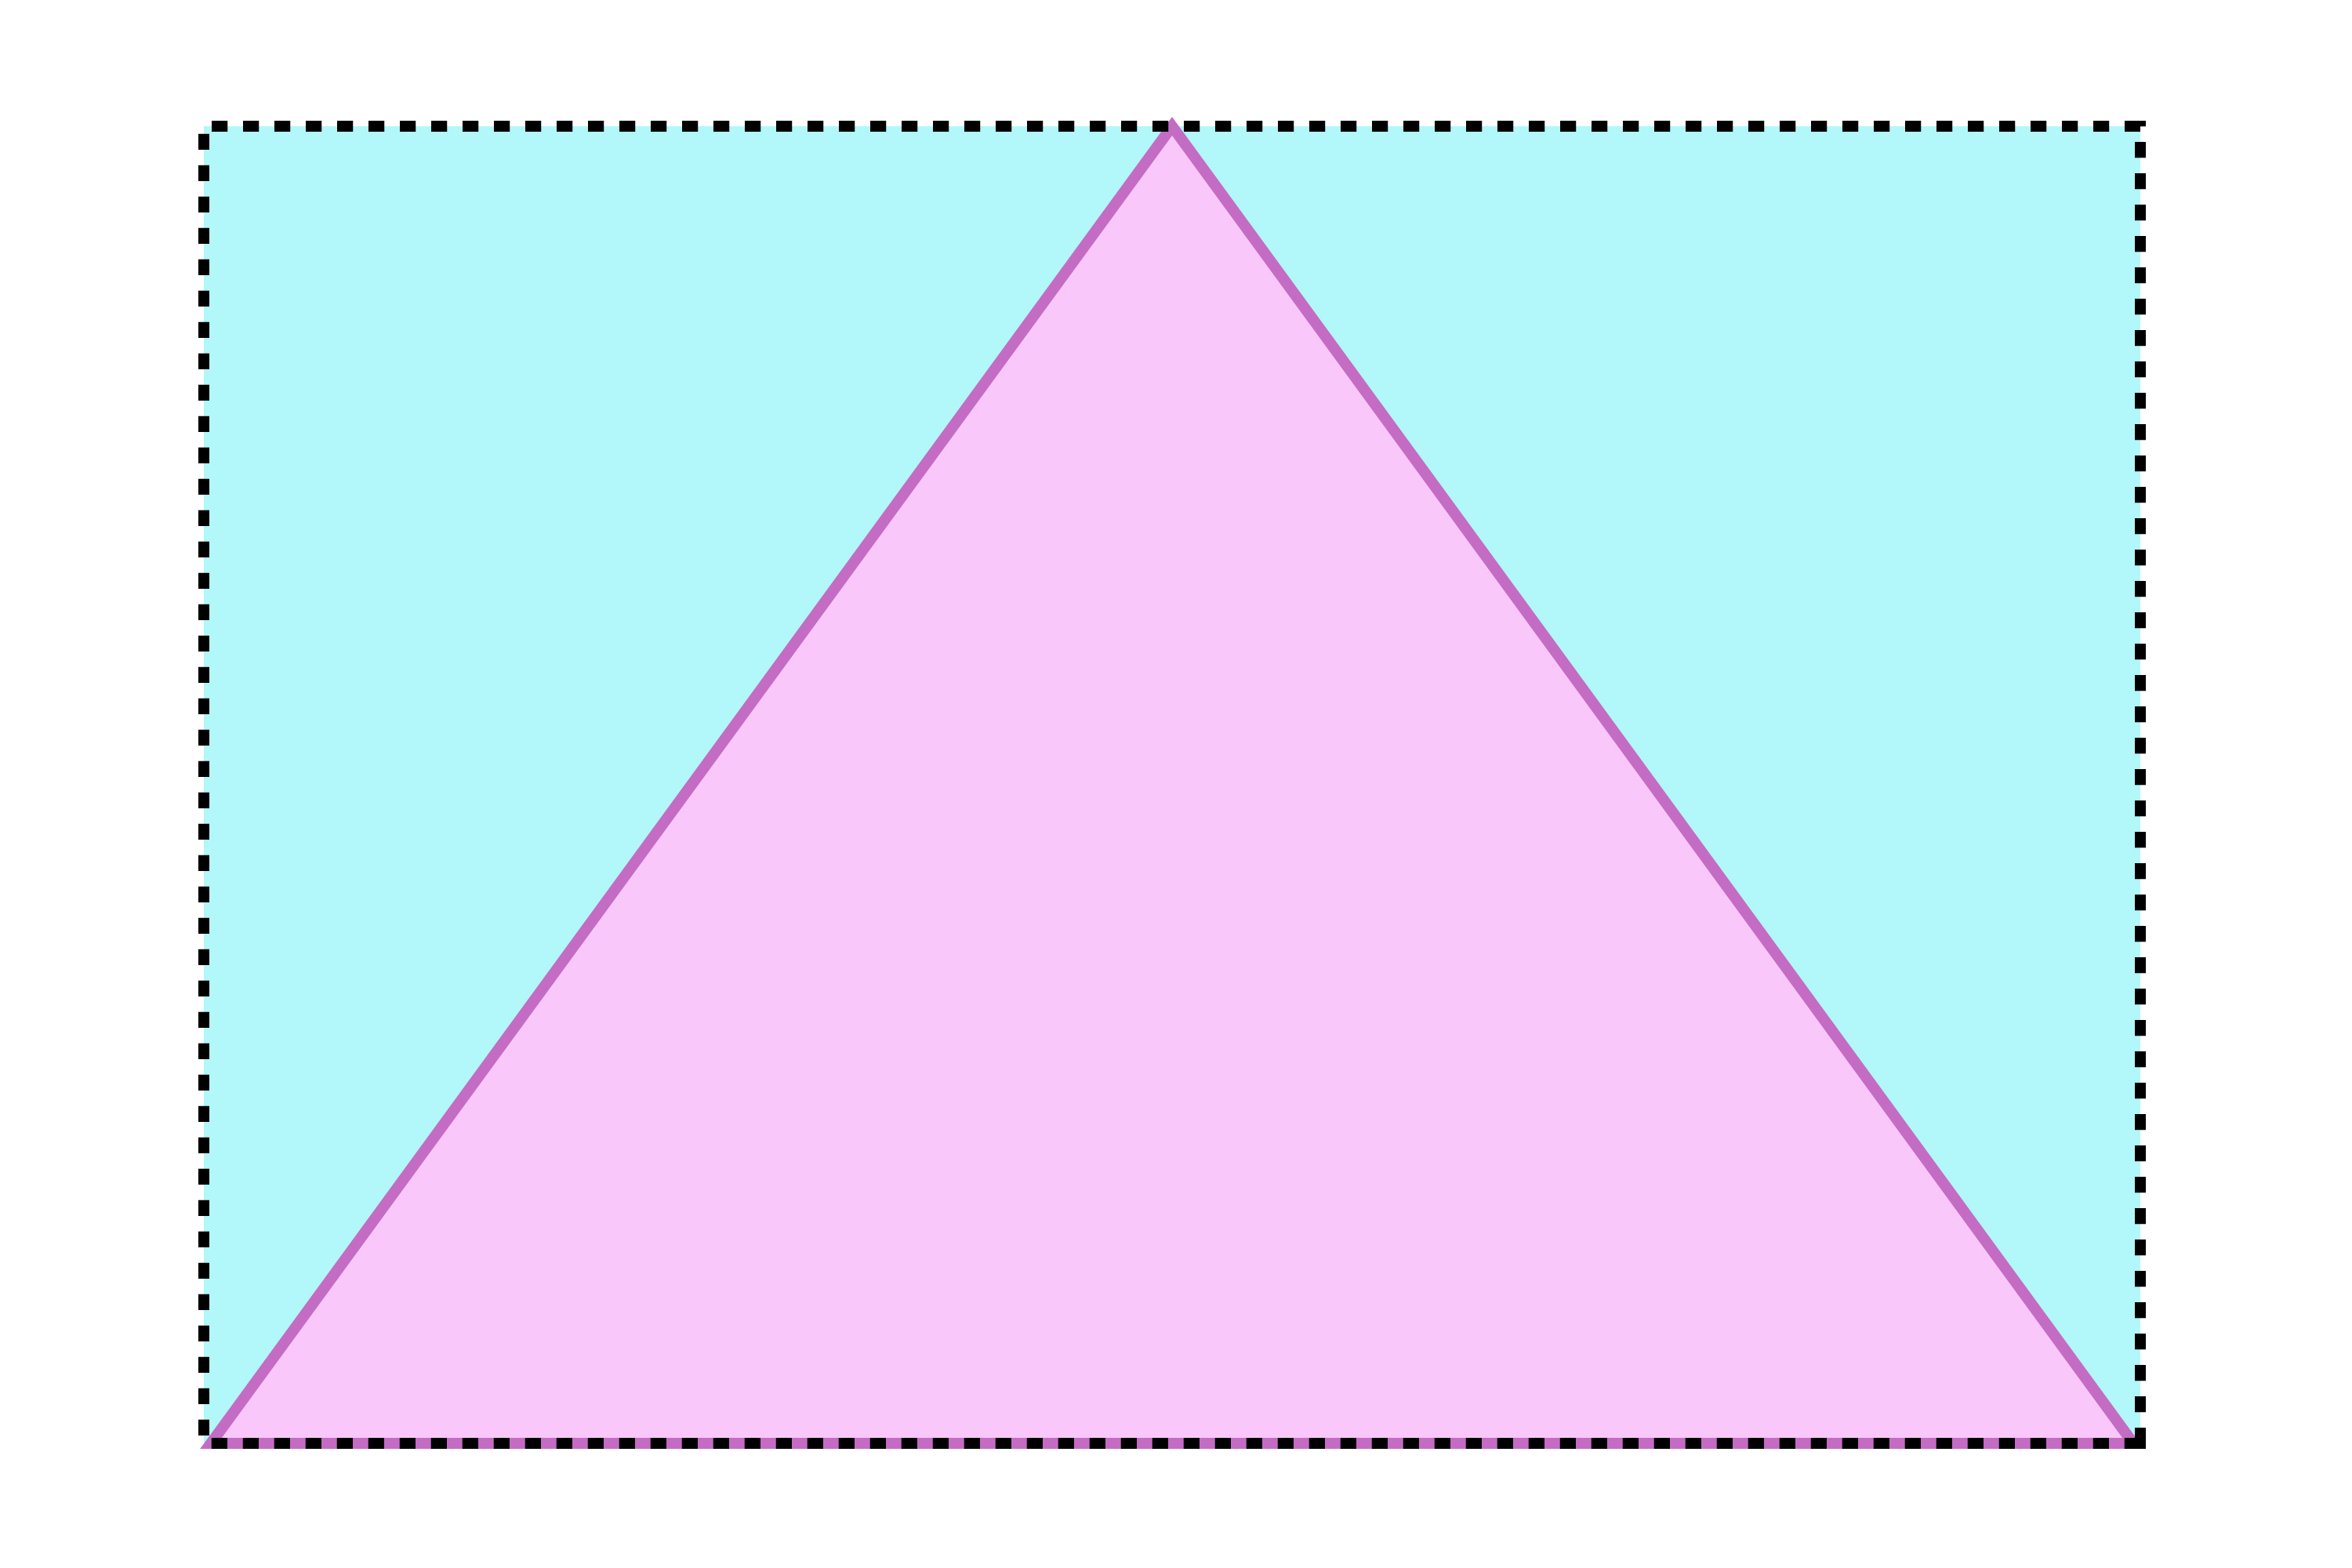 Turn the triangle into a rectangle and complete the sum, it makes the result a lot easier to understand